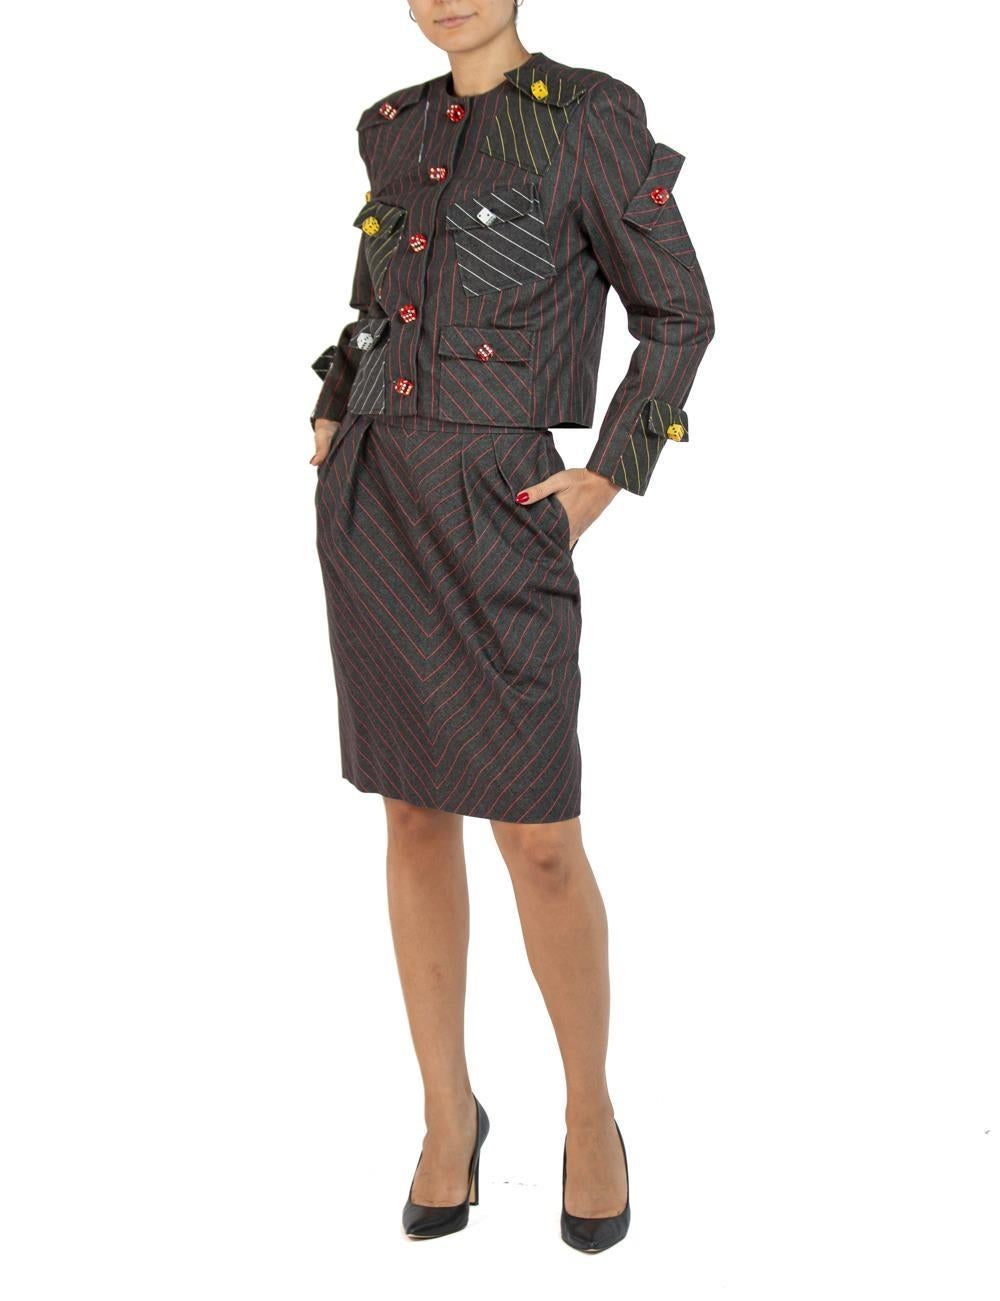 1980S PATRICK KELLY Charcoal & Red Pinstripe Denim Cotton Skirt Suit With Dice  2